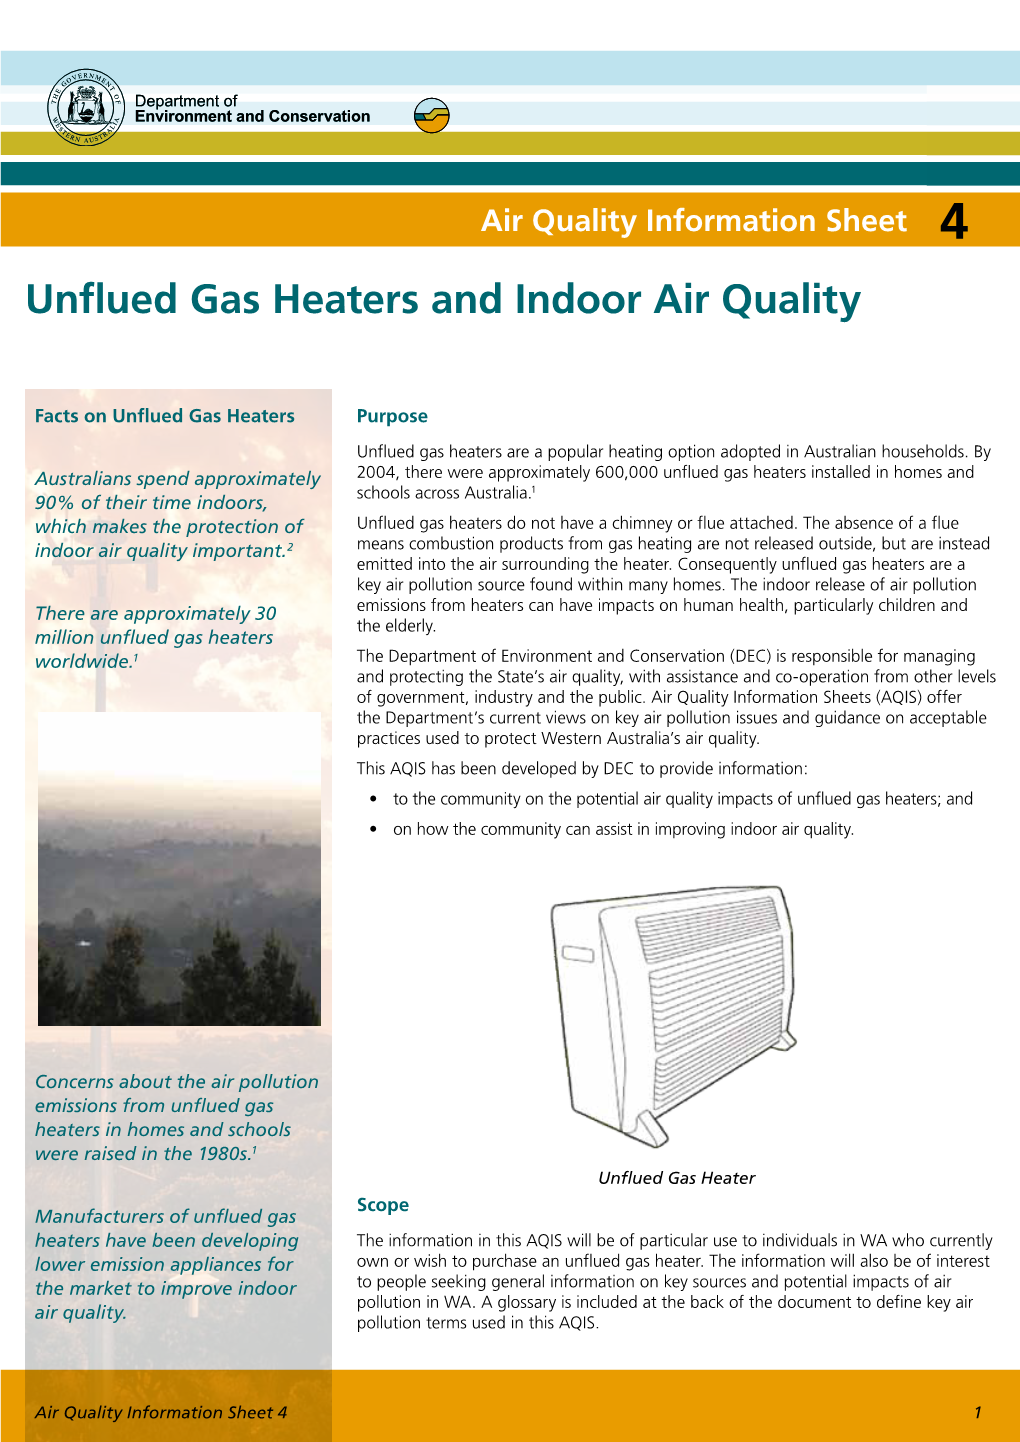 Unflued Gas Heaters and Indoor Air Quality